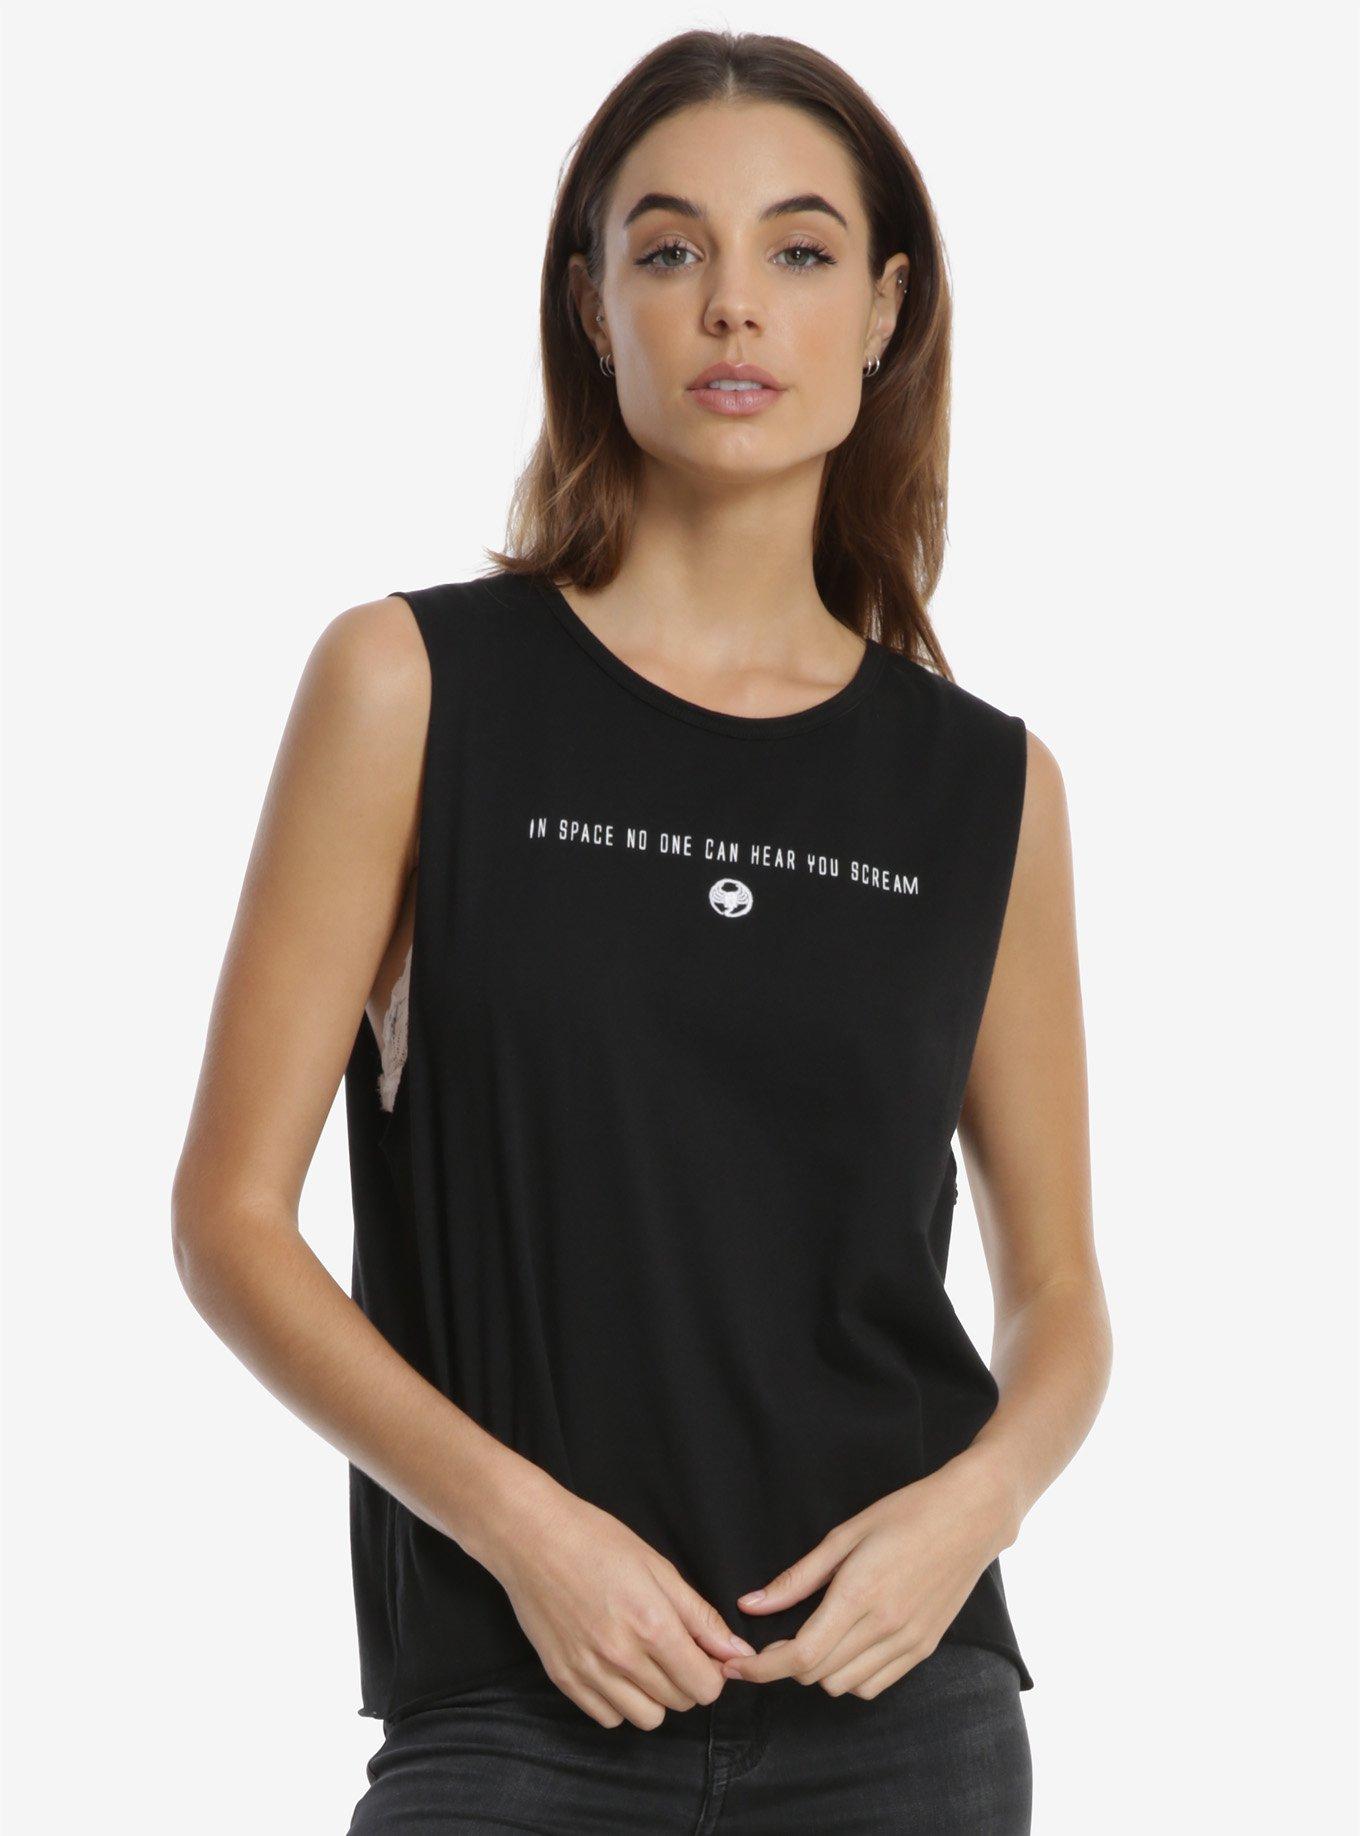 Alien No One Can Hear You Scream Womens Muscle Tank, BLACK, hi-res